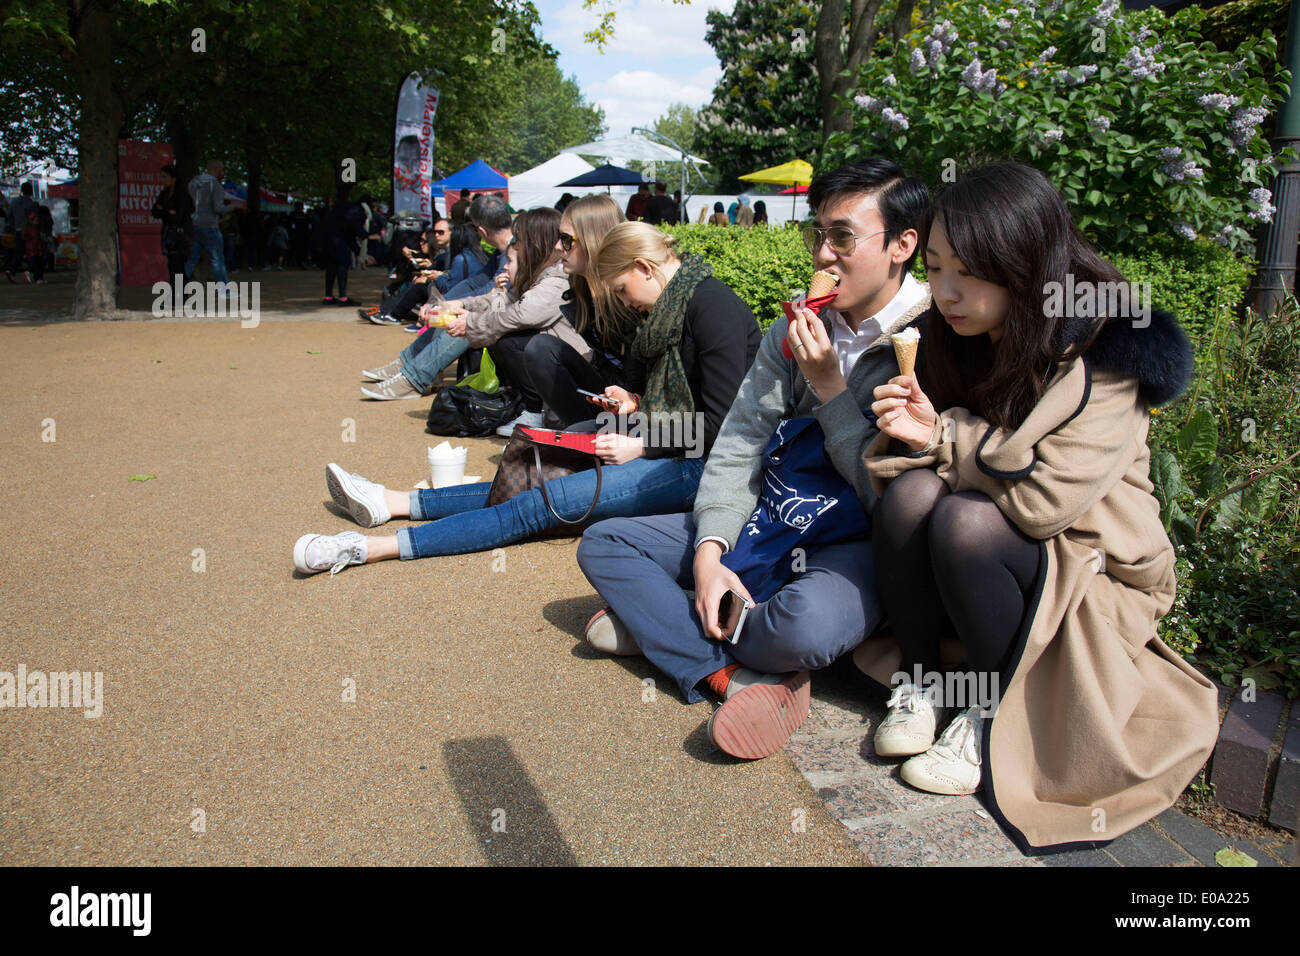 Friends eating ice cream during a food festival on the Southbank. South Bank is a significant arts and entertainment district, it's riverside walkway busy with visitors and tourists. London, UK. Stock Photo